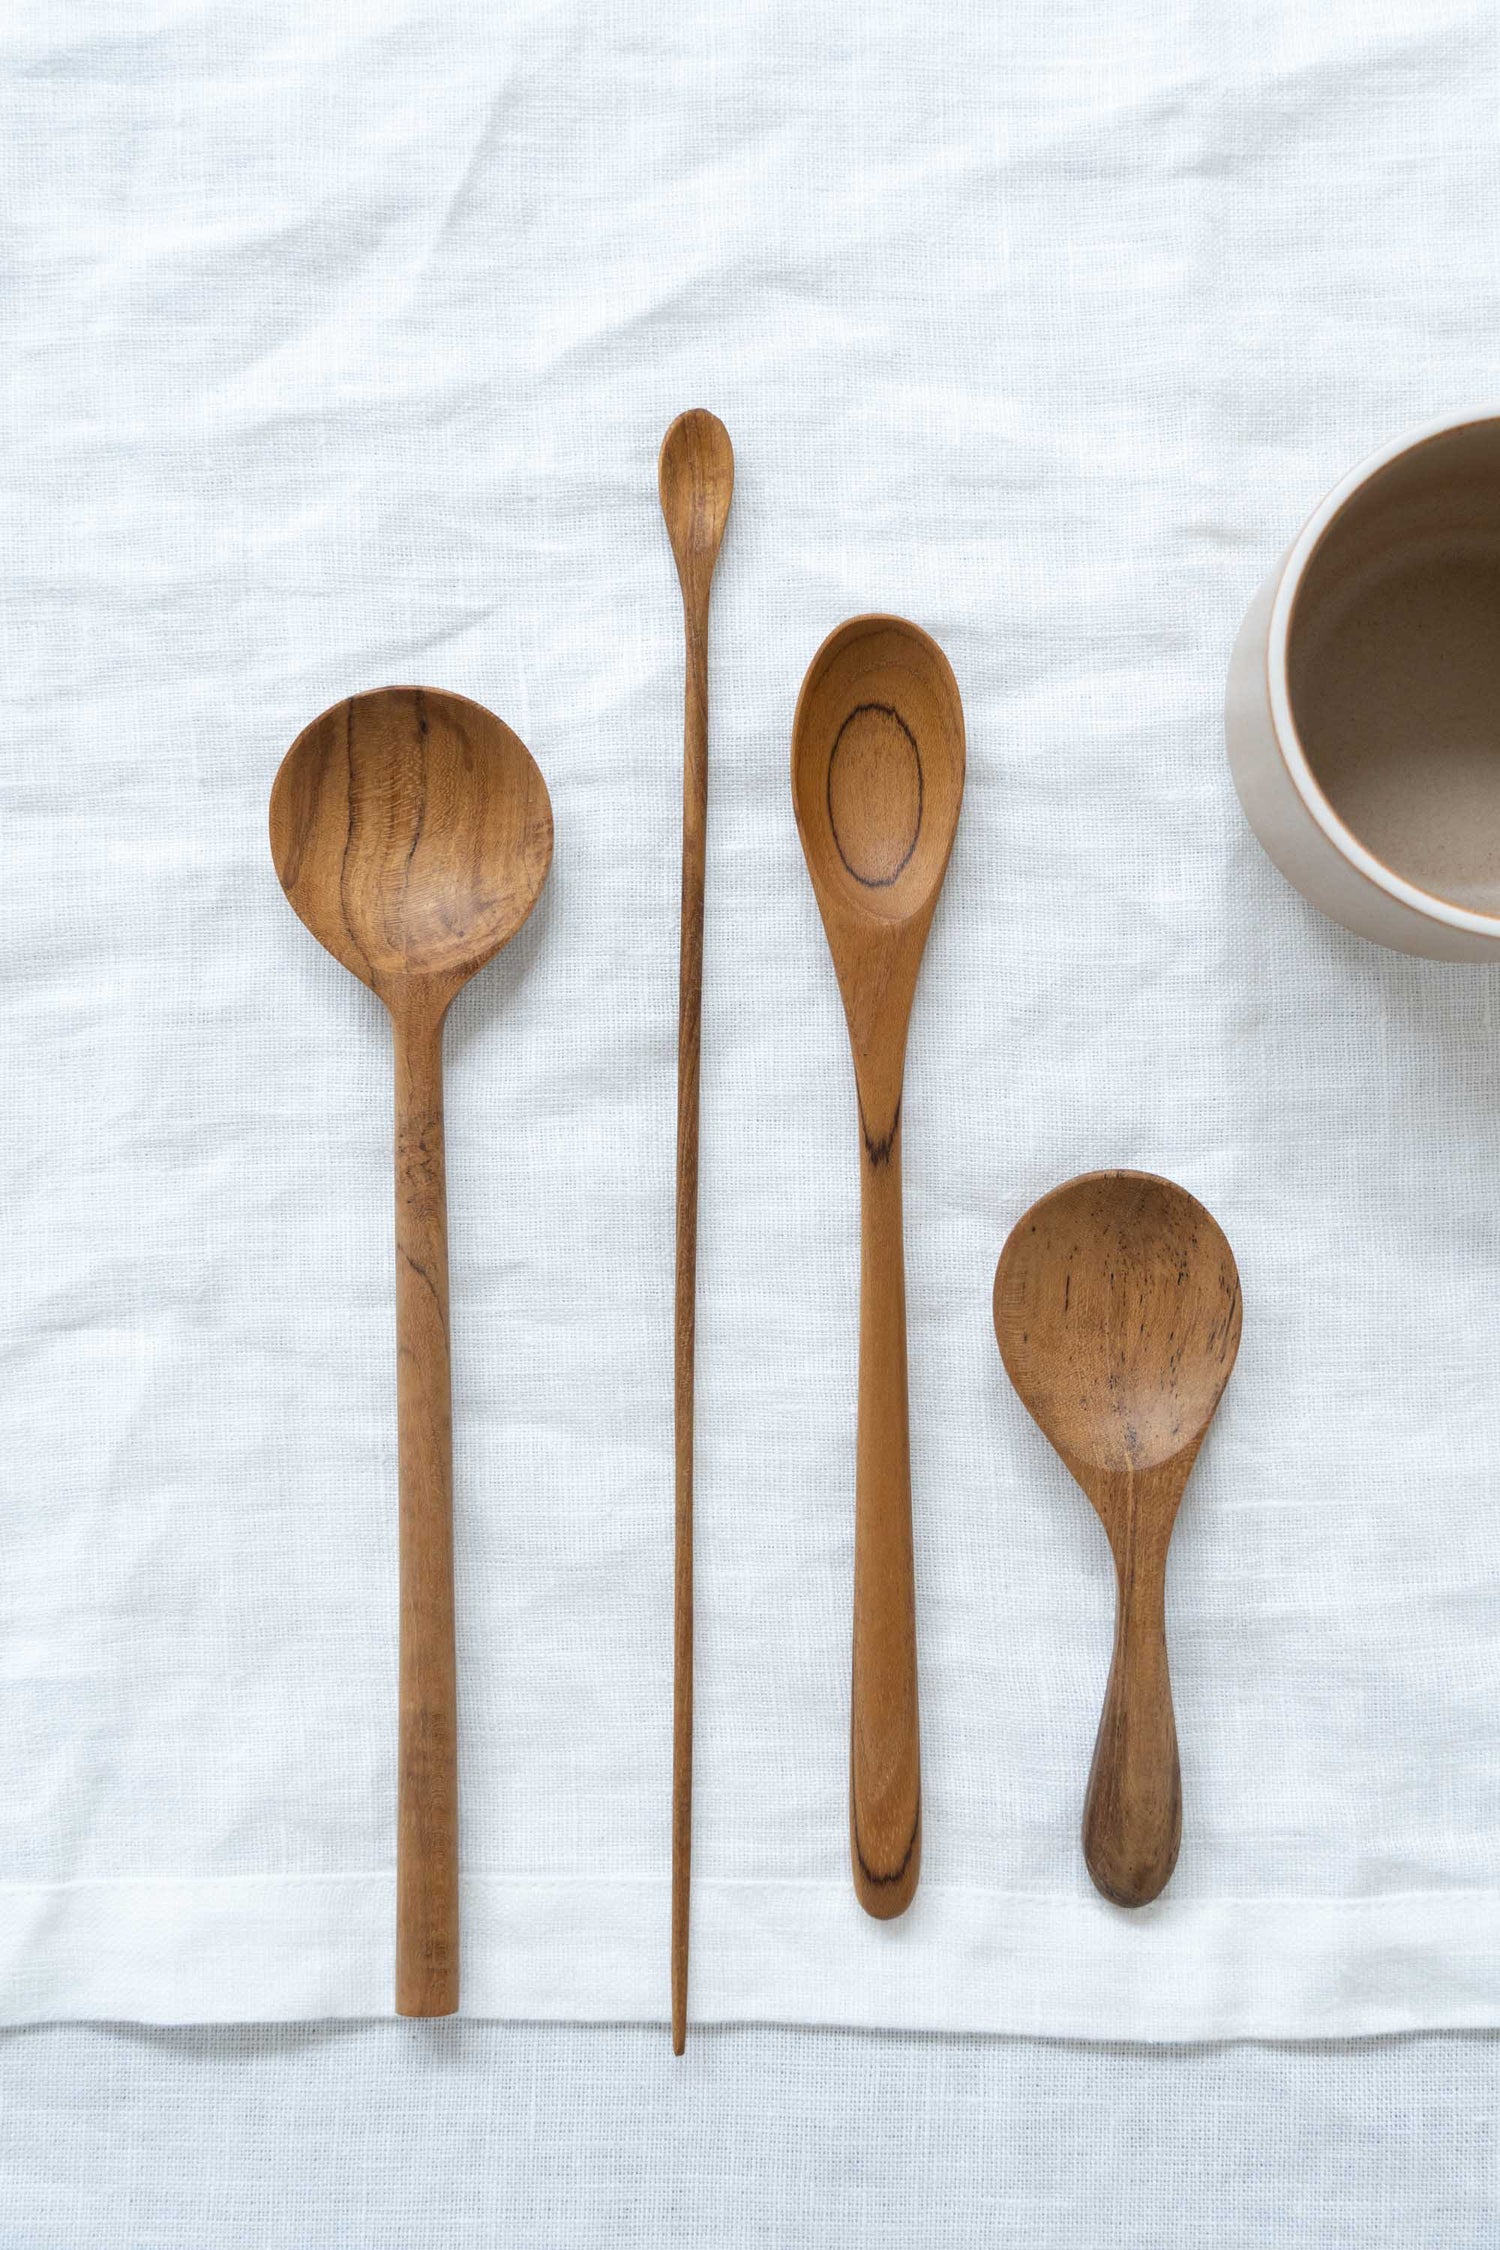 Overview of the set of Juice Spoons Reclaimed Teak by The Loft Selects.